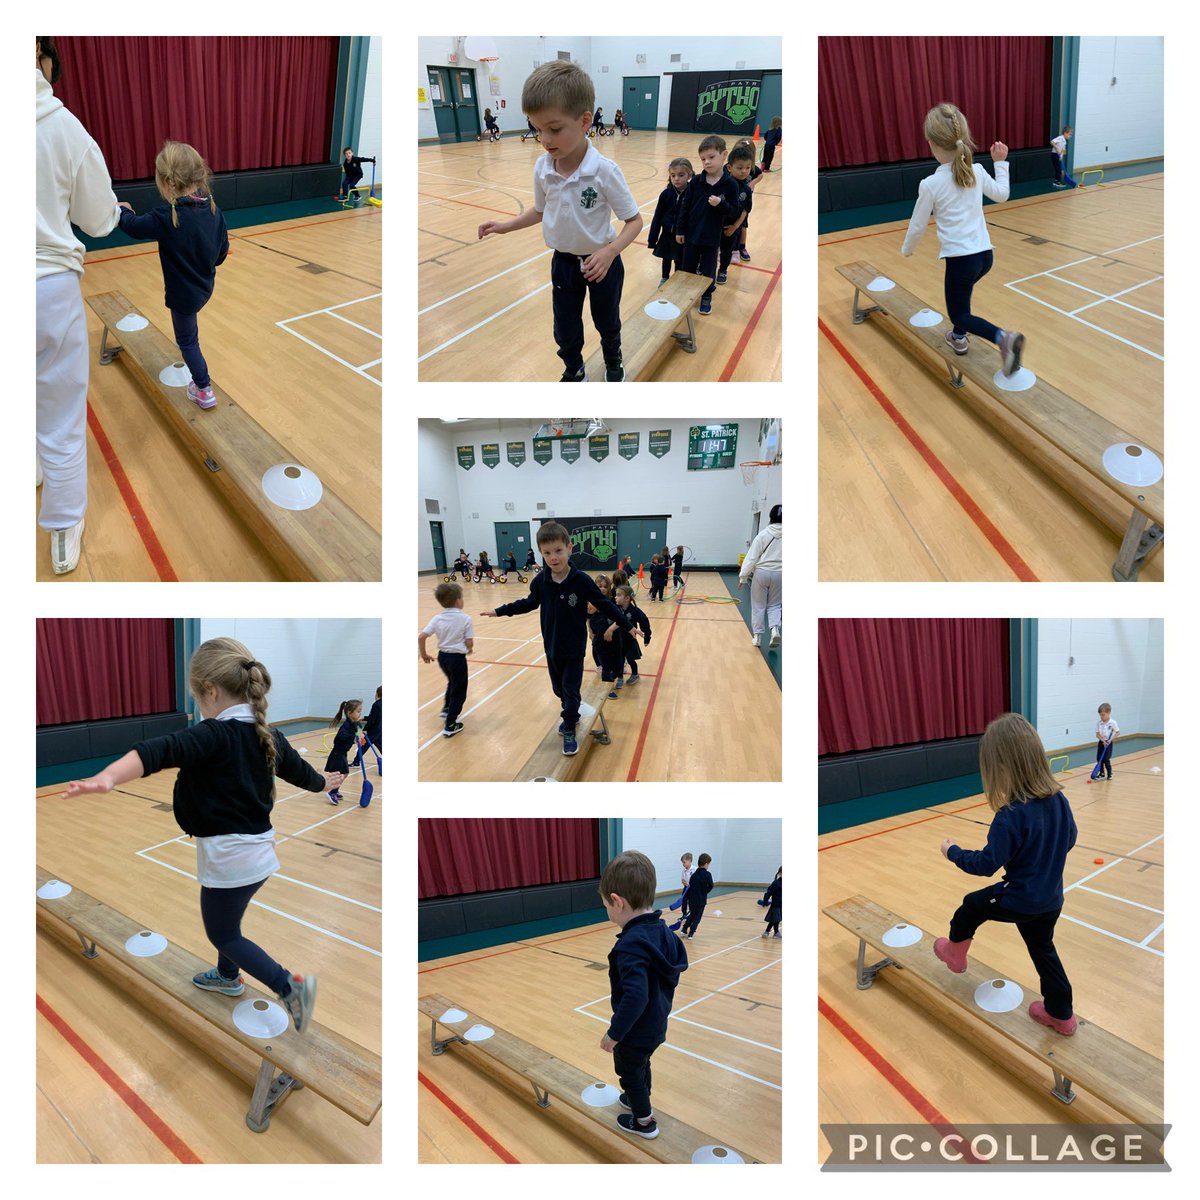 Mastering our balancing skills in gym class today!